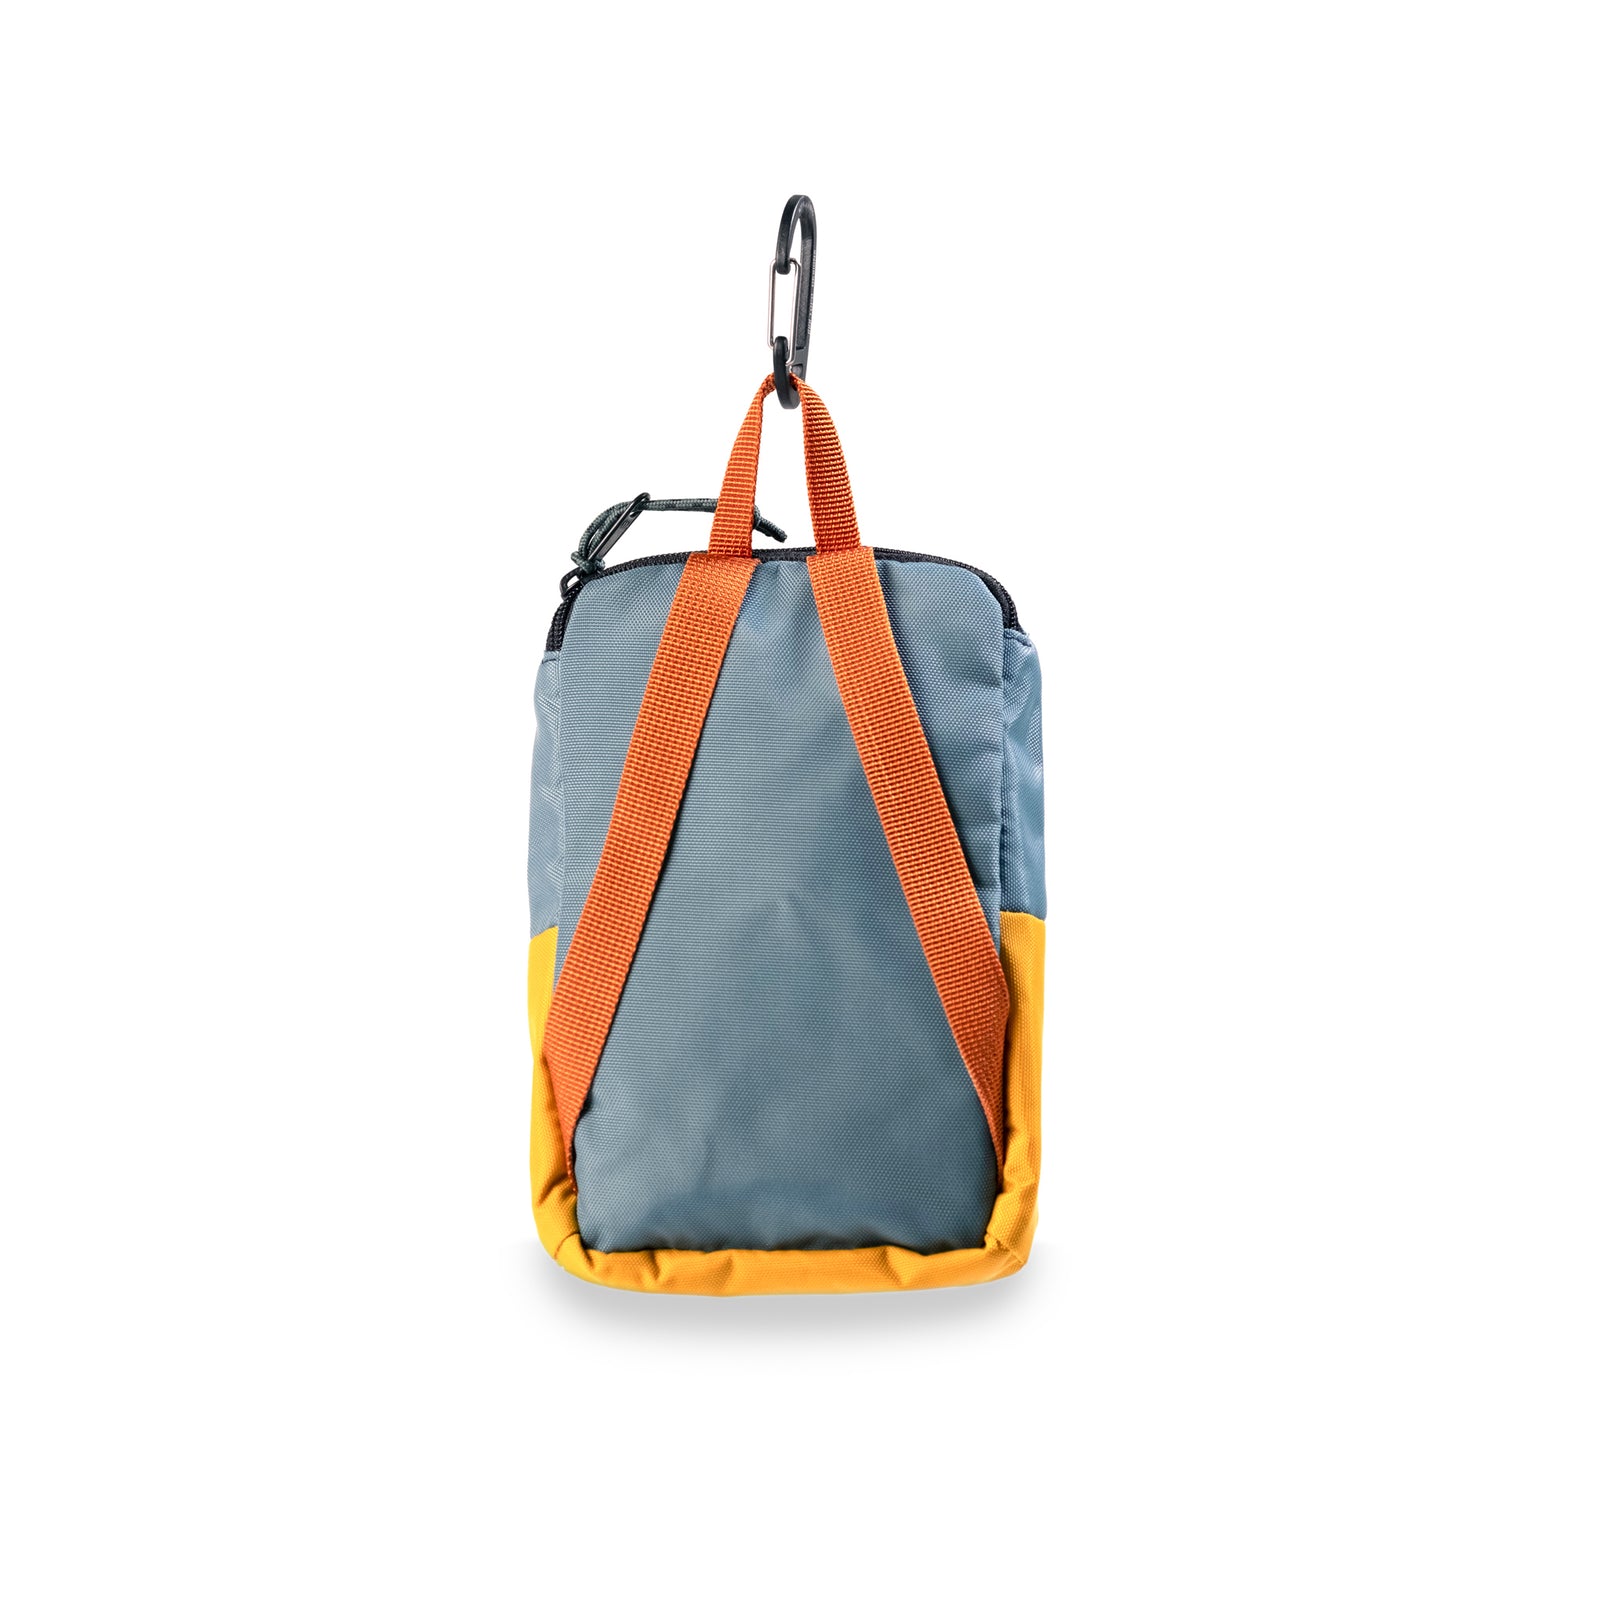 Back View of Topo Designs Rover Pack Micro in "Sea Pine / Mustard"